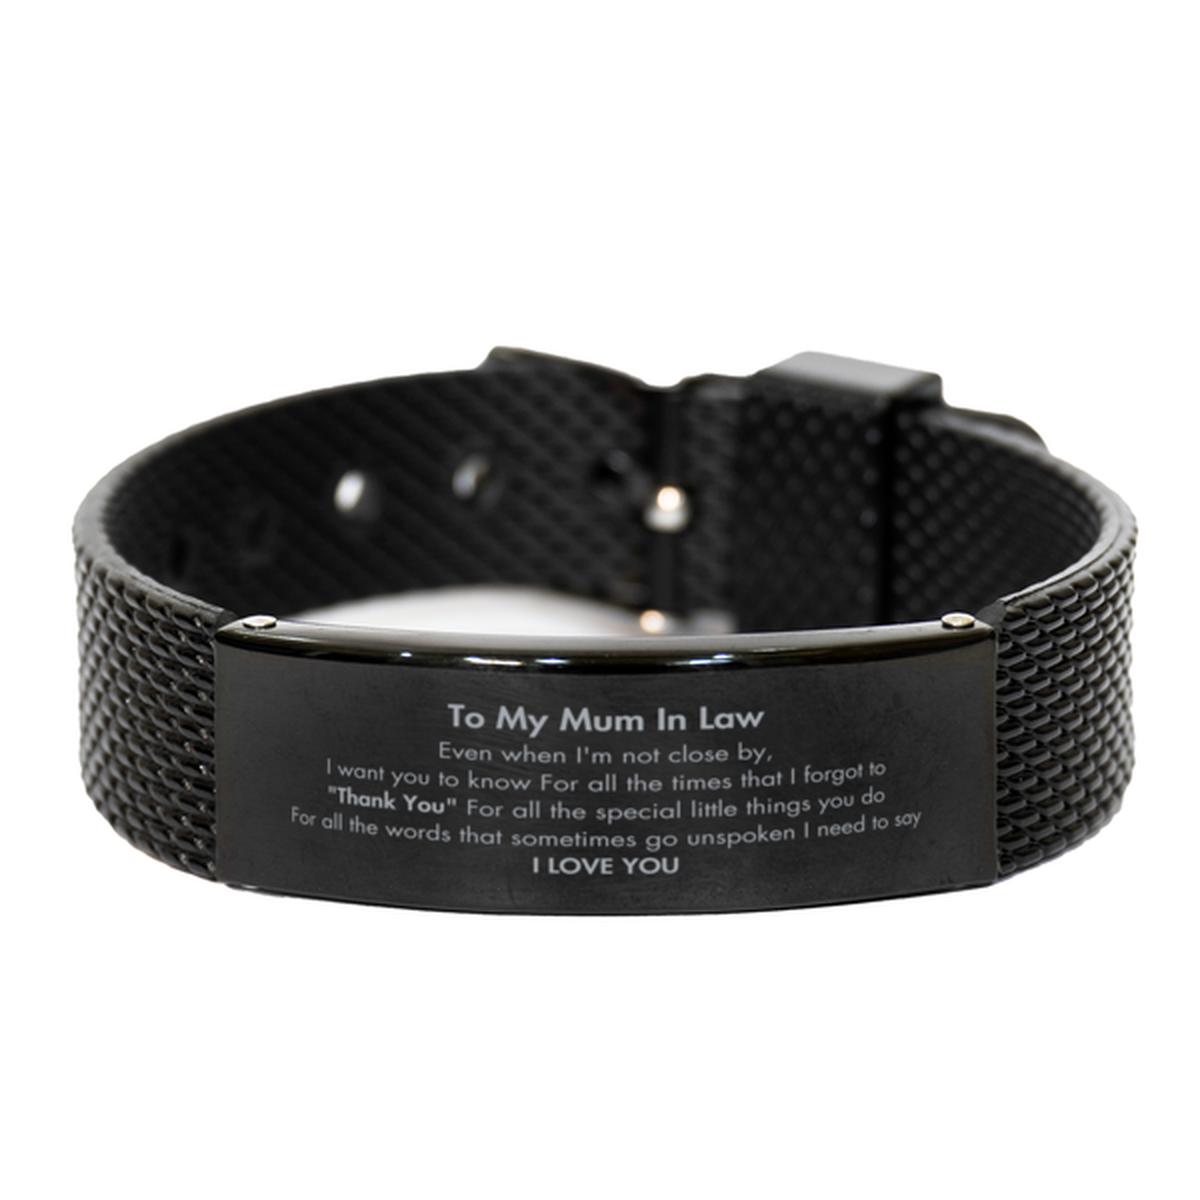 Thank You Gifts for Mum In Law , Keepsake Black Shark Mesh Bracelet Gifts for Mum In Law  Birthday Mother's day Father's Day Mum In Law  For all the words That sometimes go unspoken I need to say I LOVE YOU